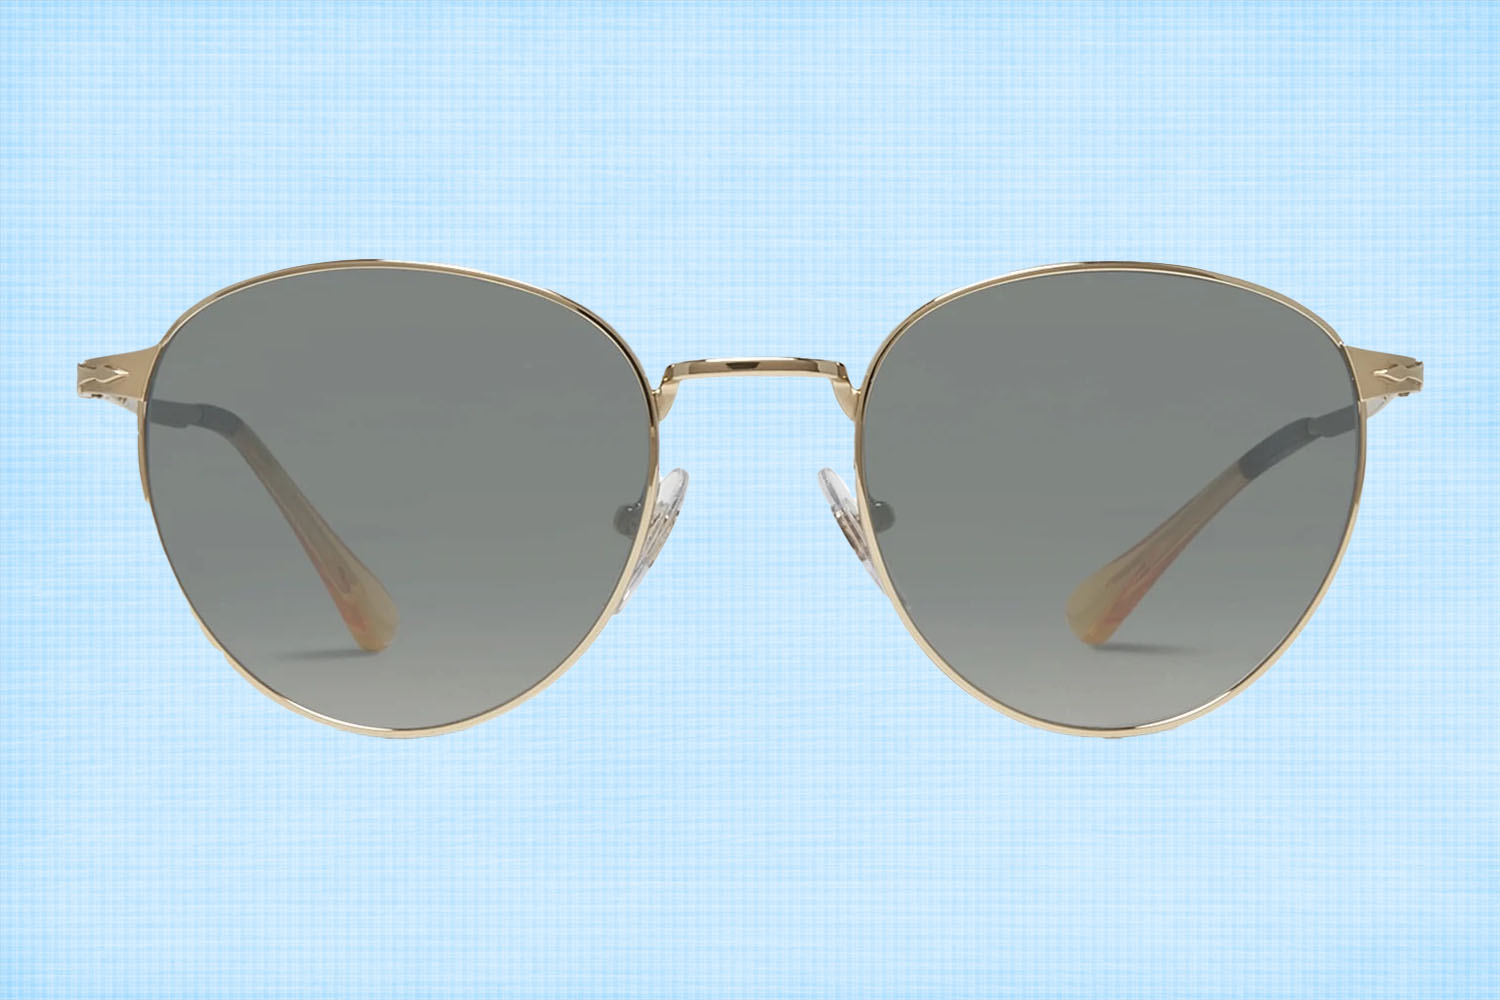 Persol 2445S